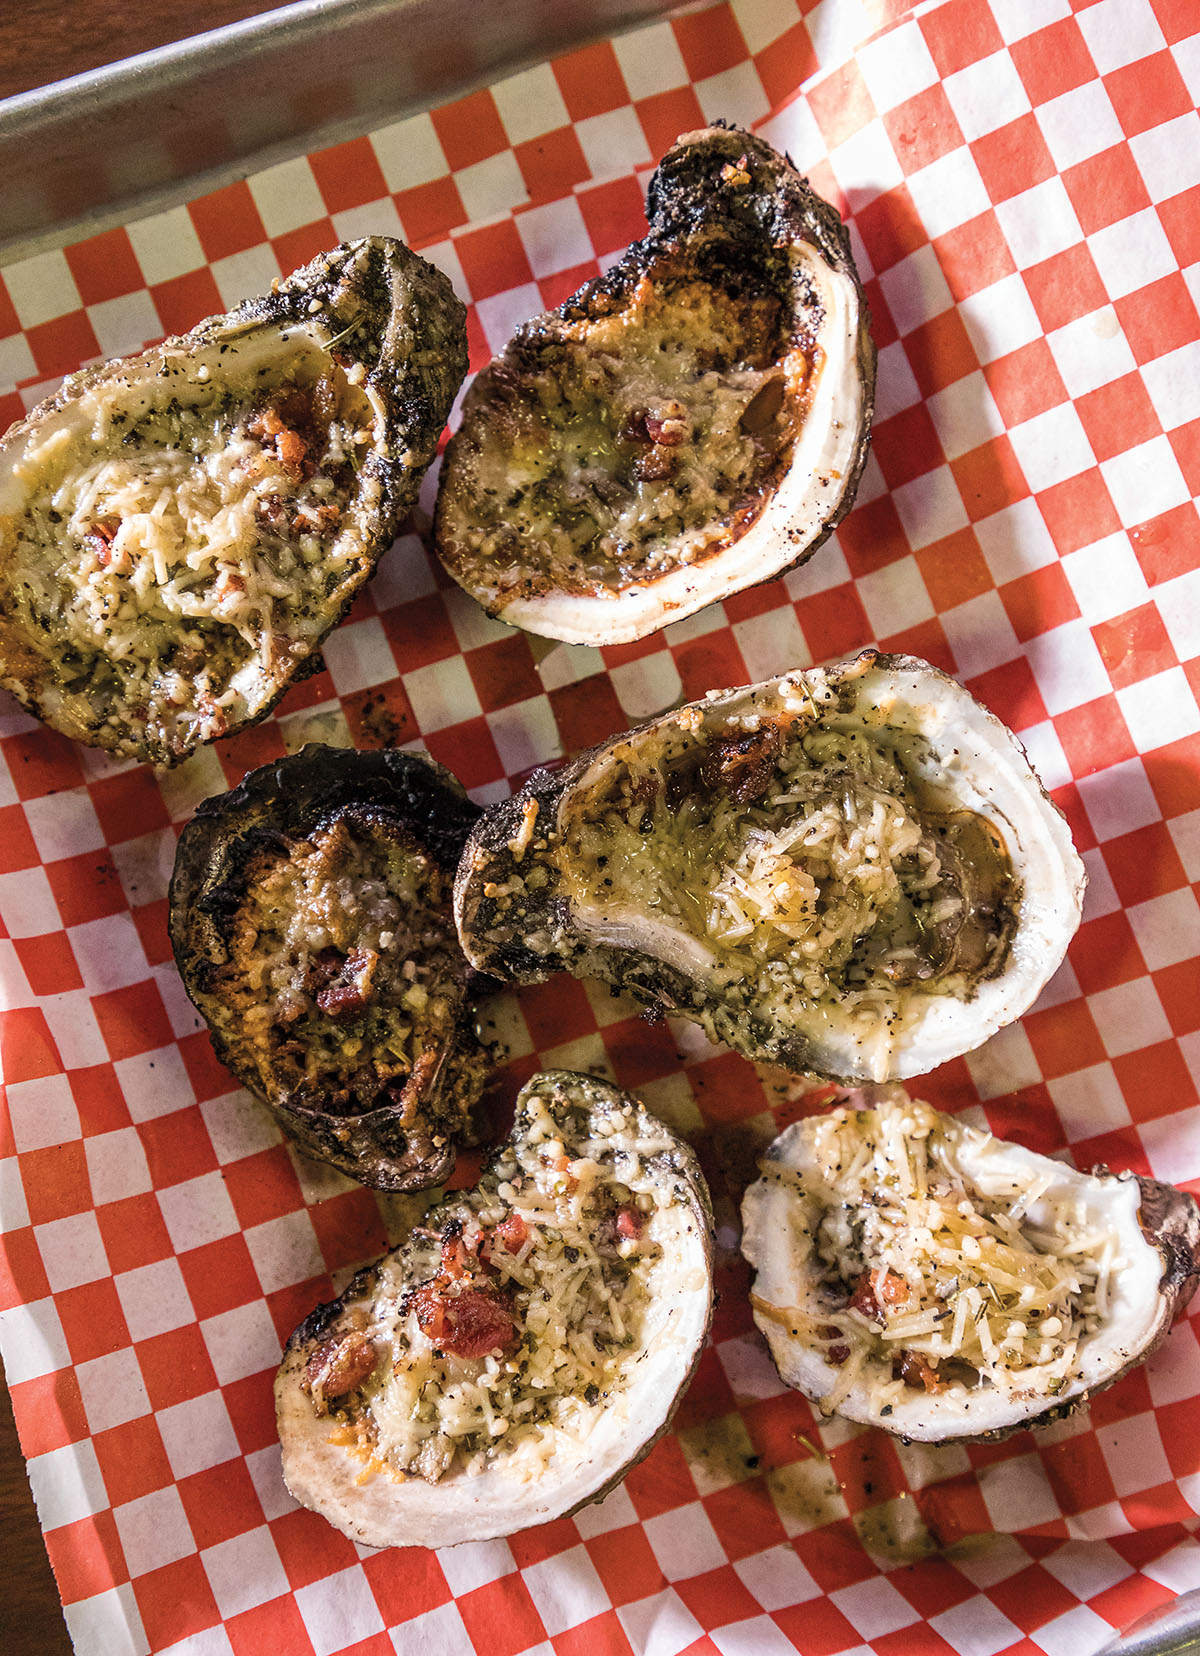 Six charbroiled oysters on a red checkered paper basket